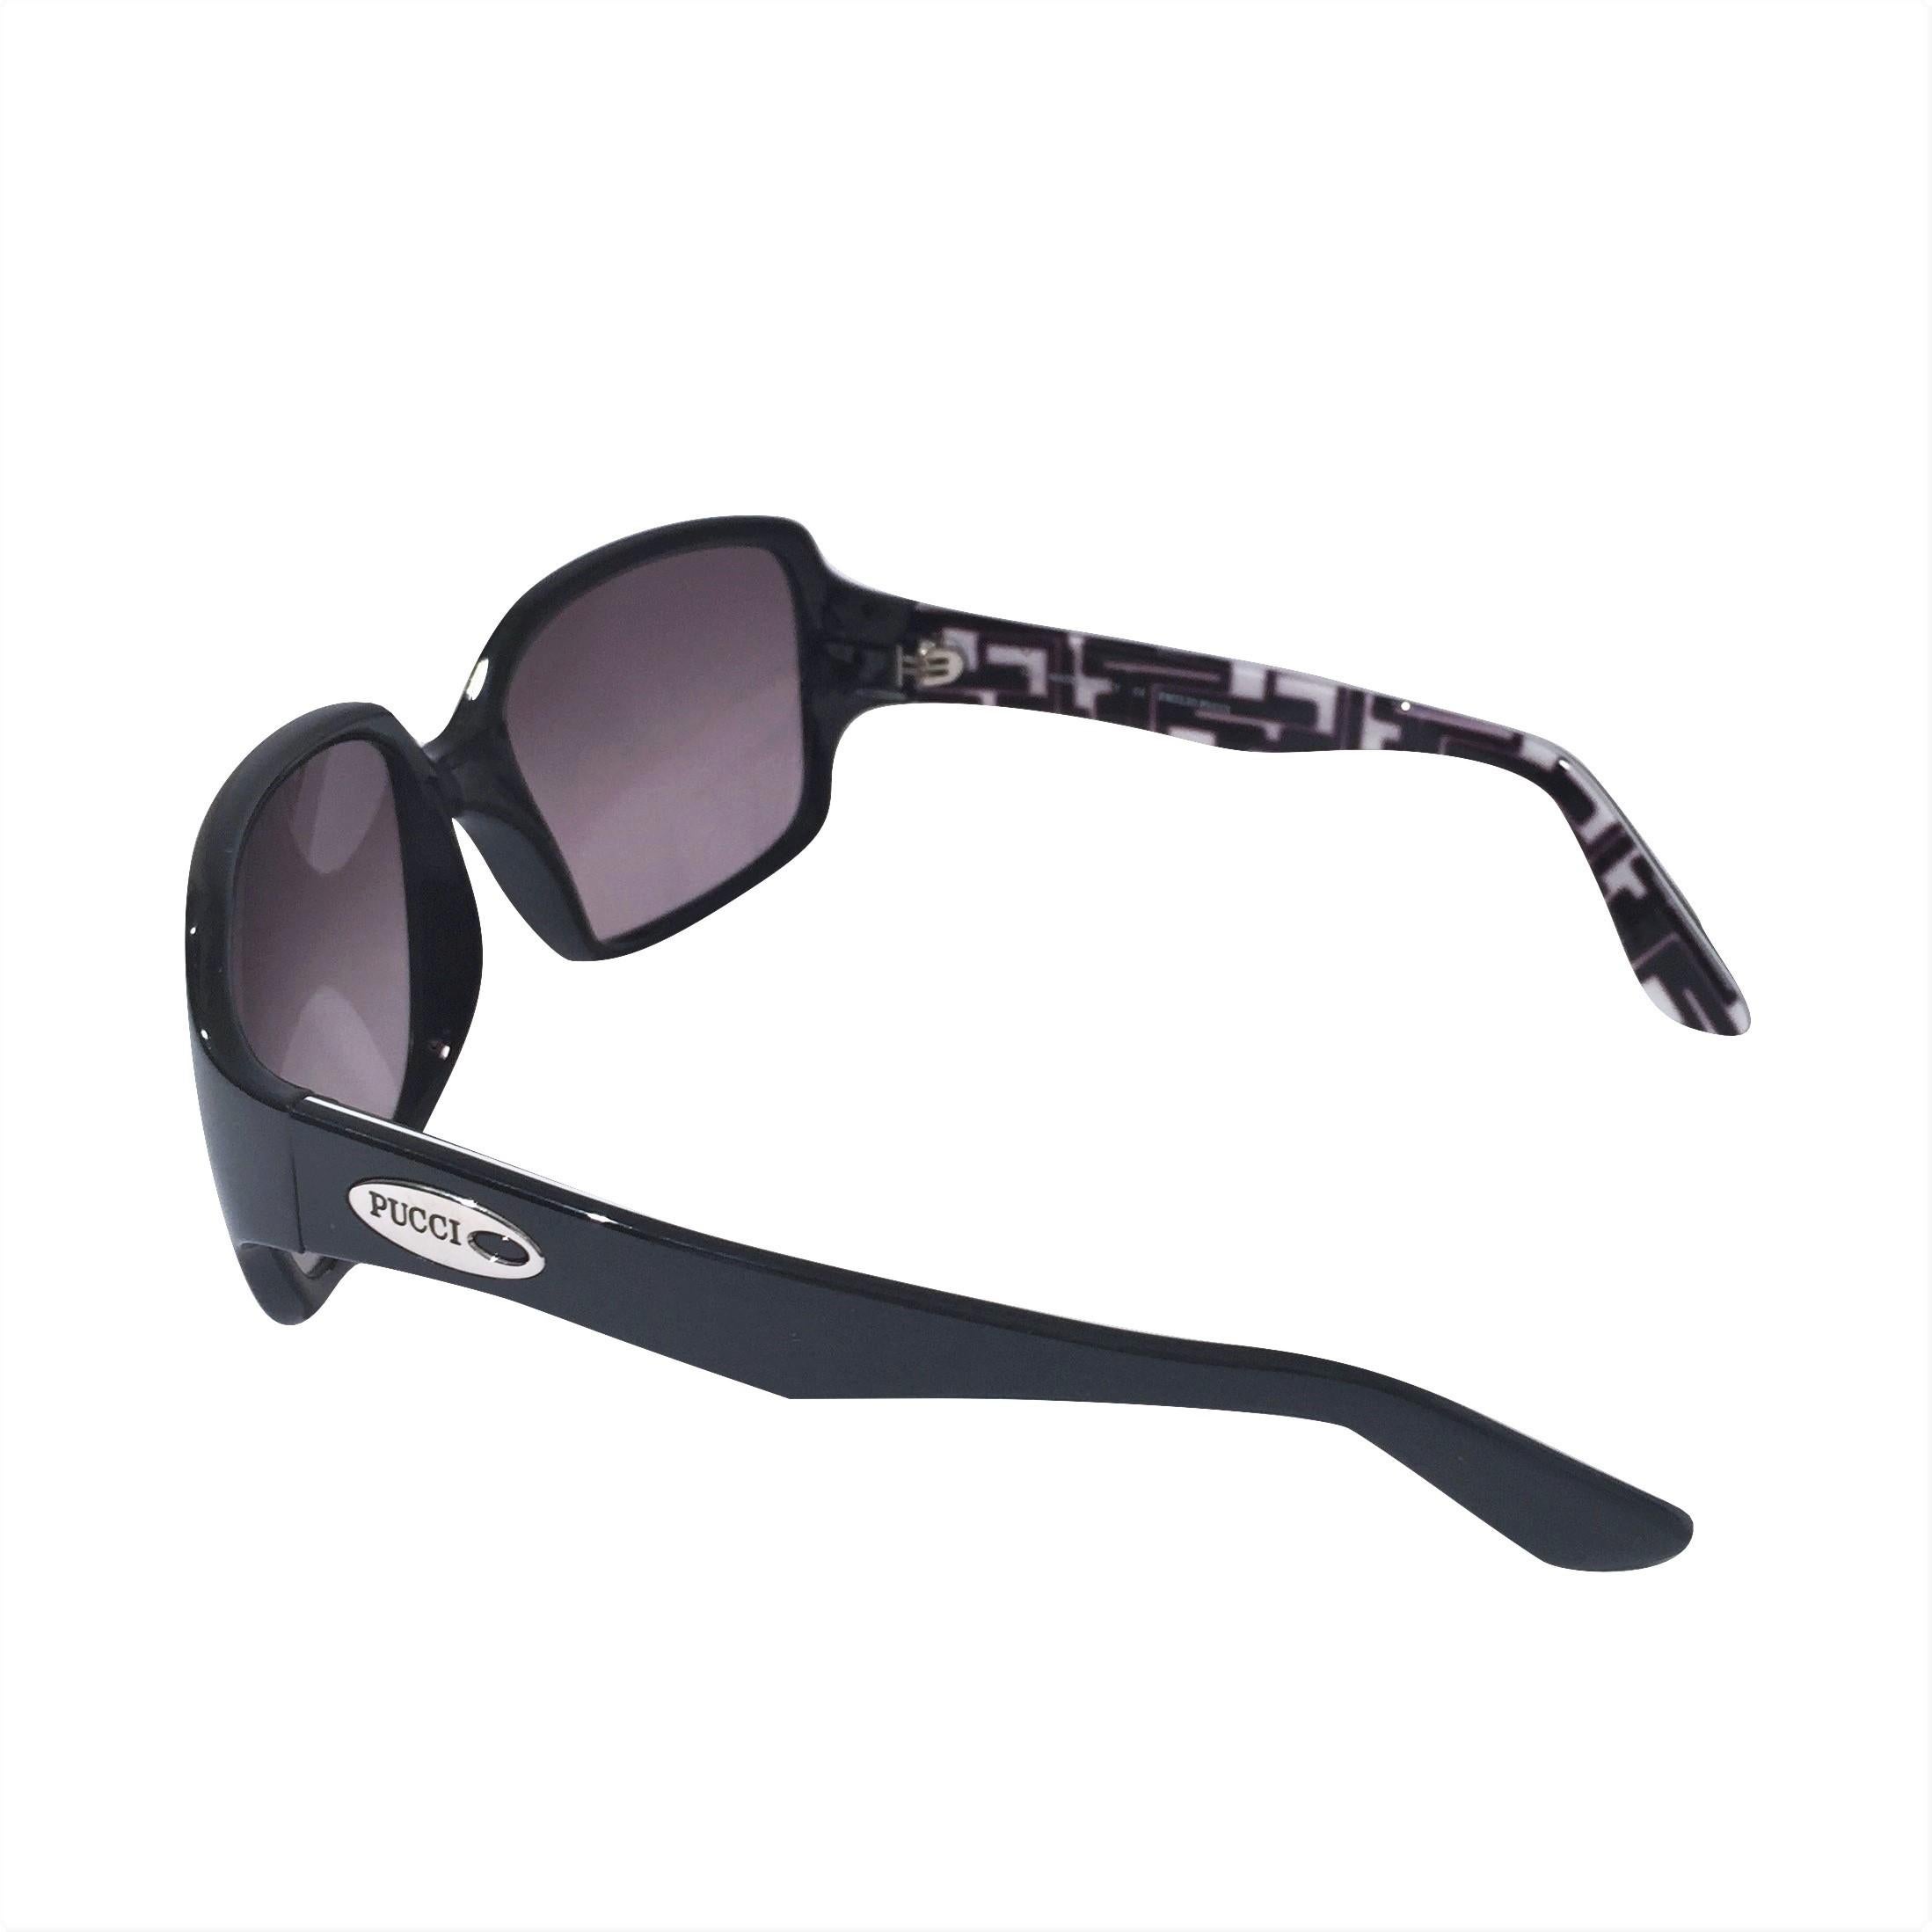 Emilio Pucci Sunglasses
Brand New
* Stunning Classic Pucci Sunglasses
* Classic Black Frames
* Pucci Print Interior:
* Black, White & Pale Pink
* Silver Pucci Logo on Both Sides
* Handmade ZYL in Italy
* 100% UV Protection
* Comes with Case,